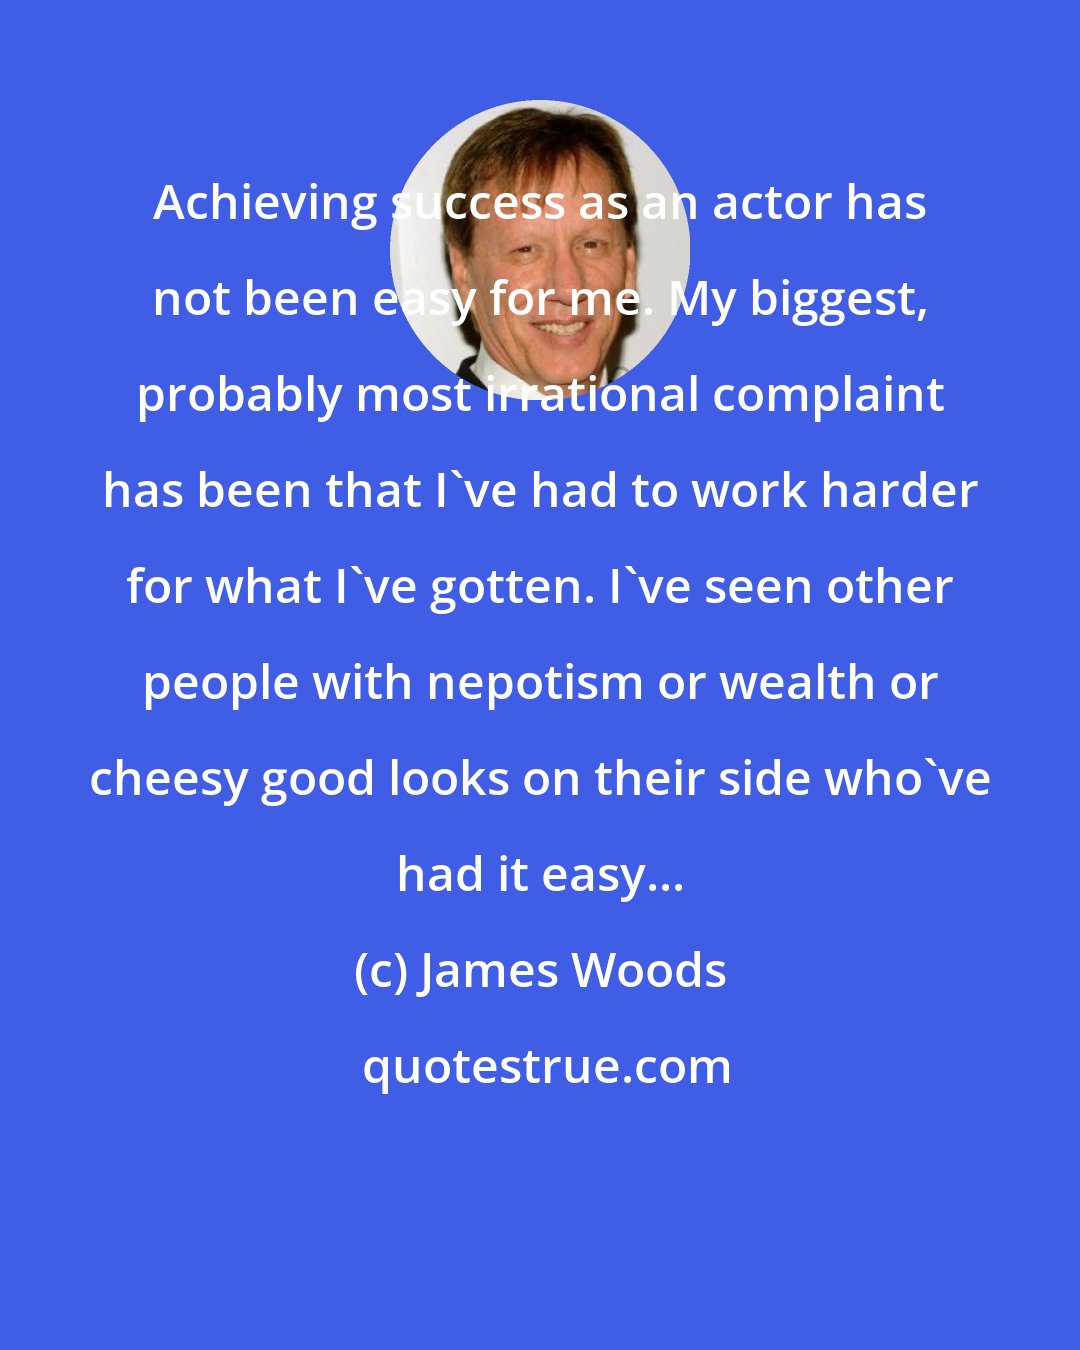 James Woods: Achieving success as an actor has not been easy for me. My biggest, probably most irrational complaint has been that I've had to work harder for what I've gotten. I've seen other people with nepotism or wealth or cheesy good looks on their side who've had it easy...